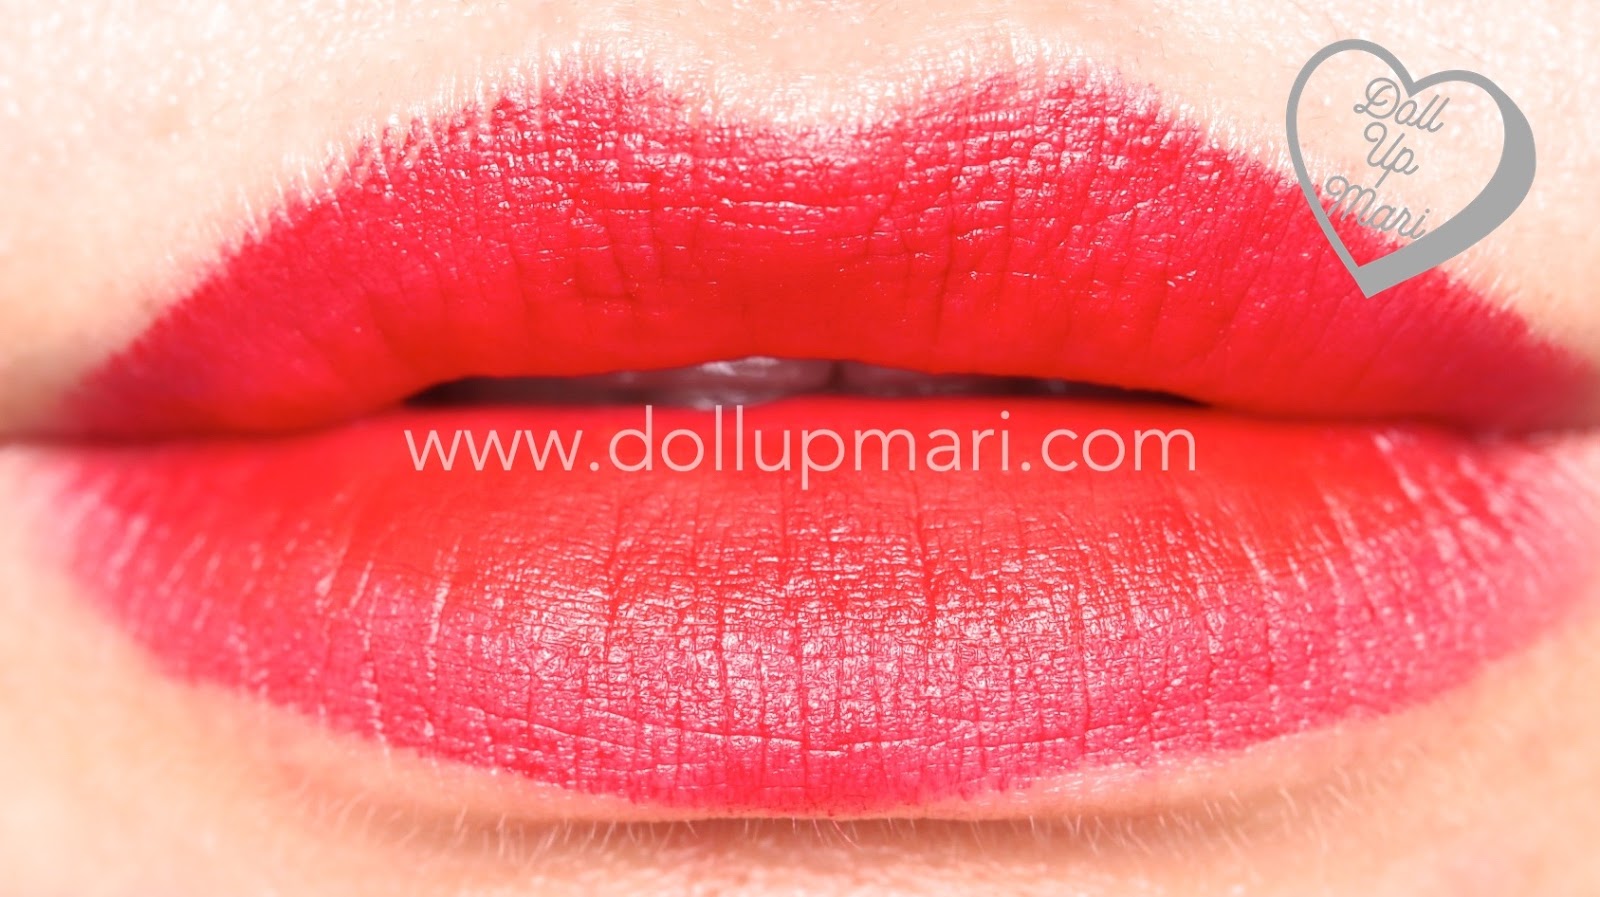 lip swatch of Red Supreme shade of AVON Perfectly Matte Lipstick